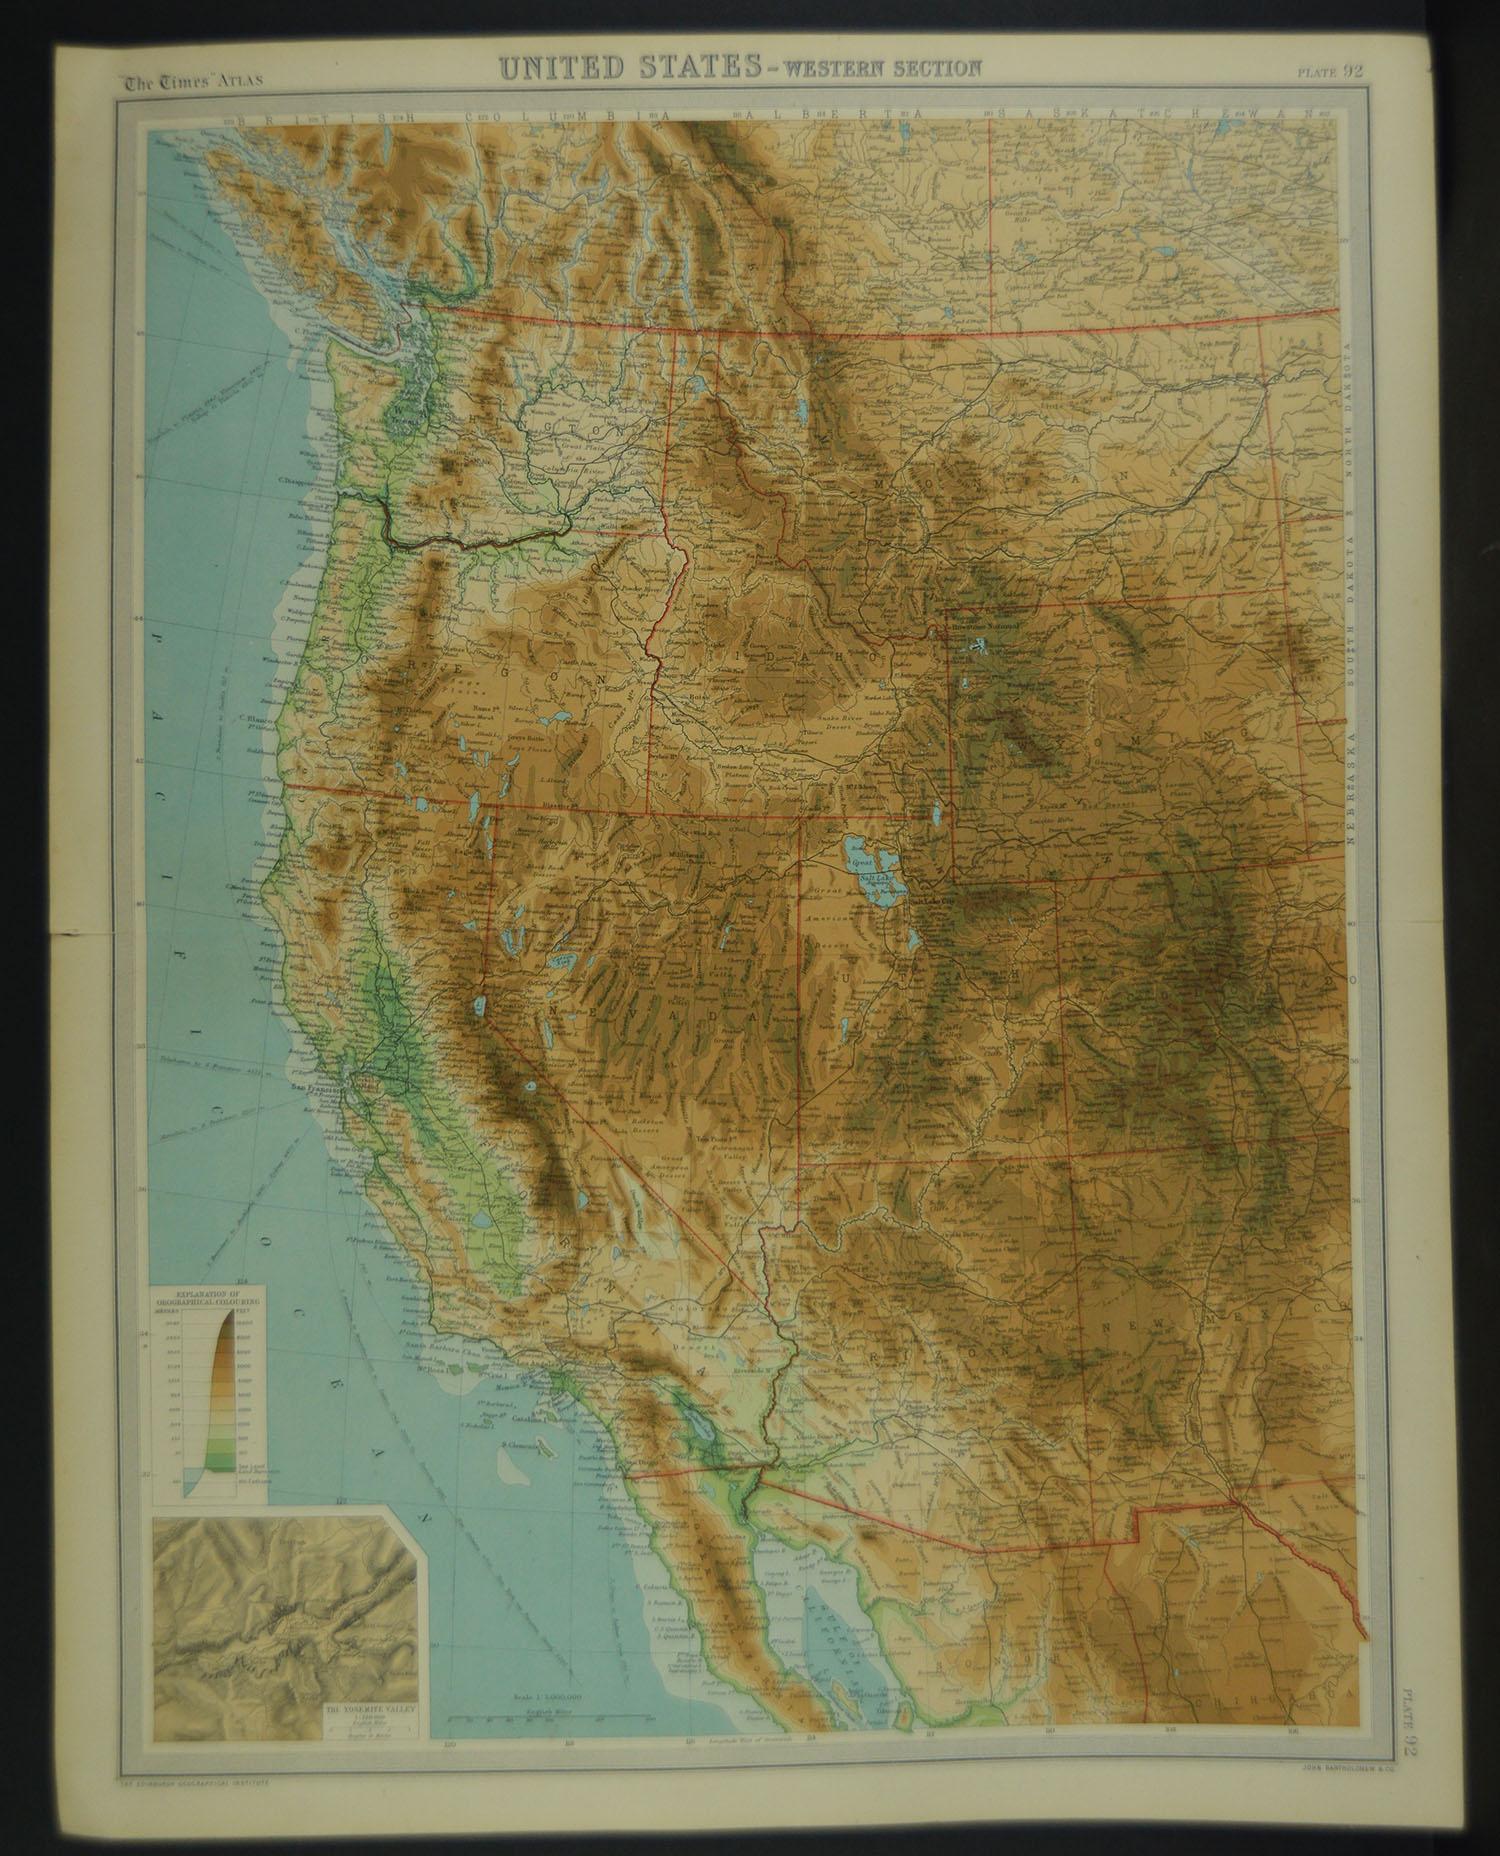 Great maps of Central USA, the West, the North East and the East.

Unframed

Original color

By John Bartholomew and Co. Edinburgh Geographical Institute

Published, circa 1920

The measurements given below are for one section.

Free